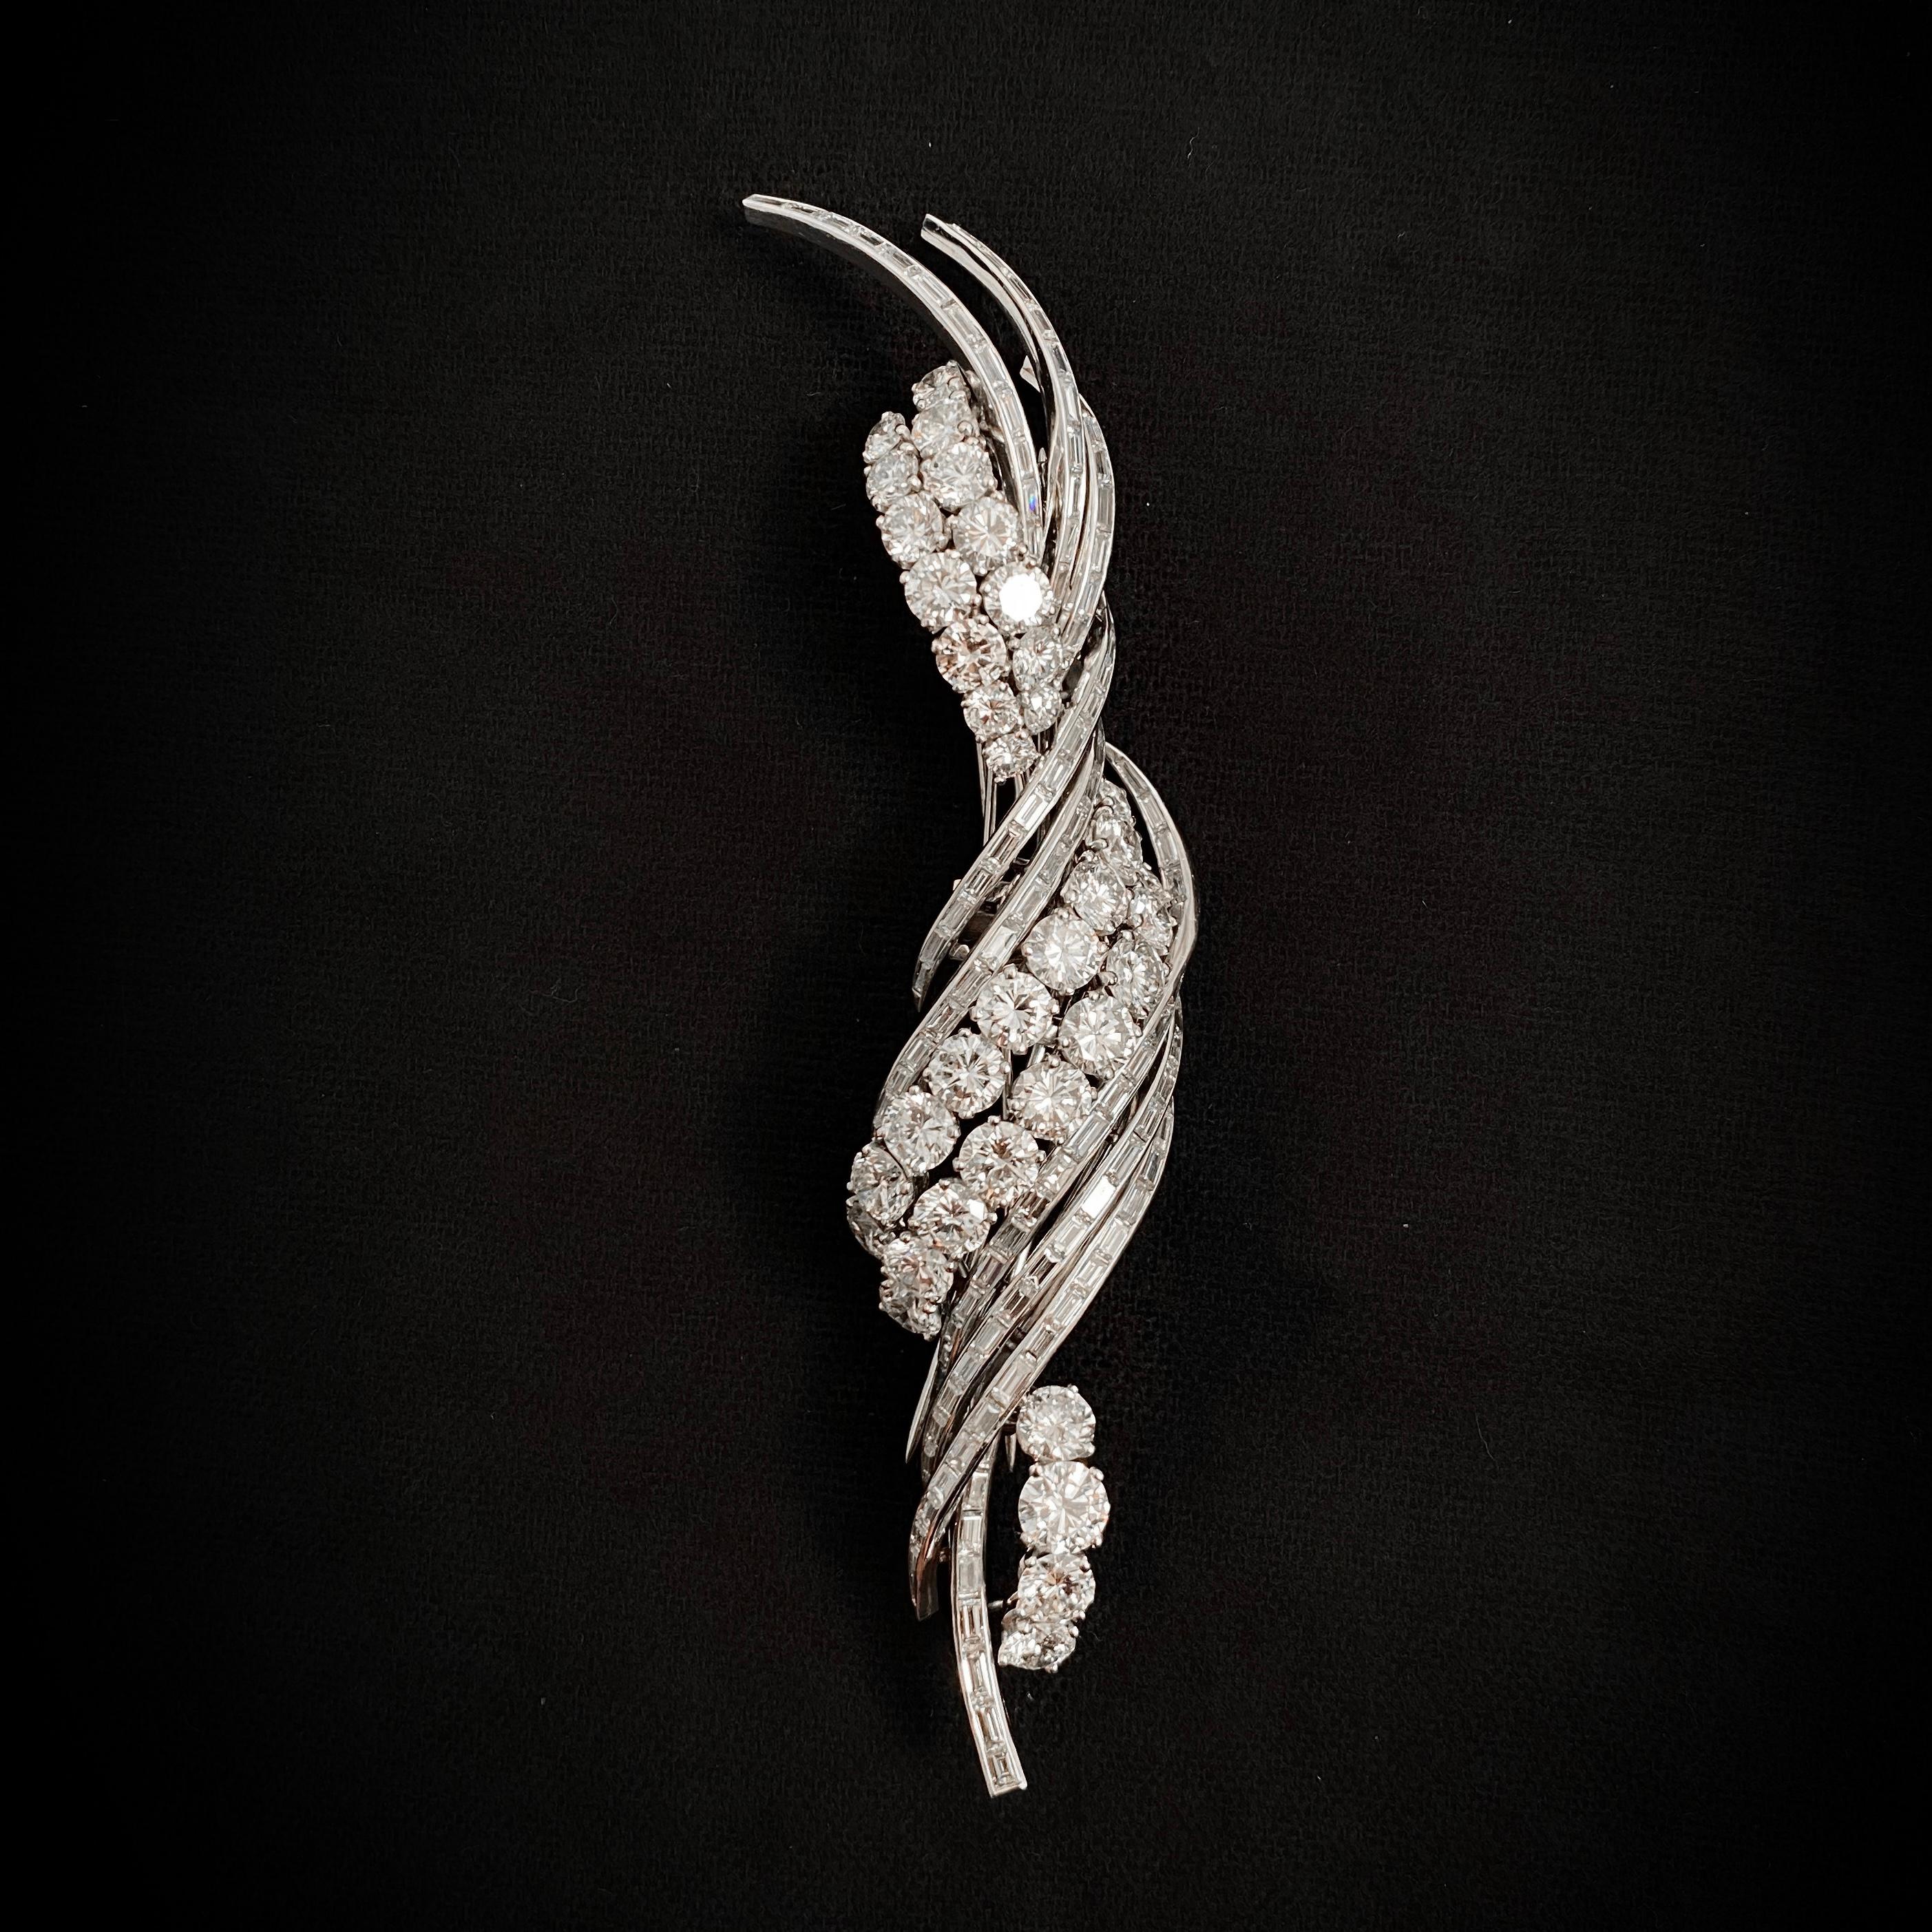 1950s 17ct Diamond Floral Spray Double Clip Convertible Brooch in Platinum. A statement piece for anyone who loves the sparkliest diamonds. This brooch is modeled as a stylized floral spray of a naturalistic twisted design, seamlessly set throughout